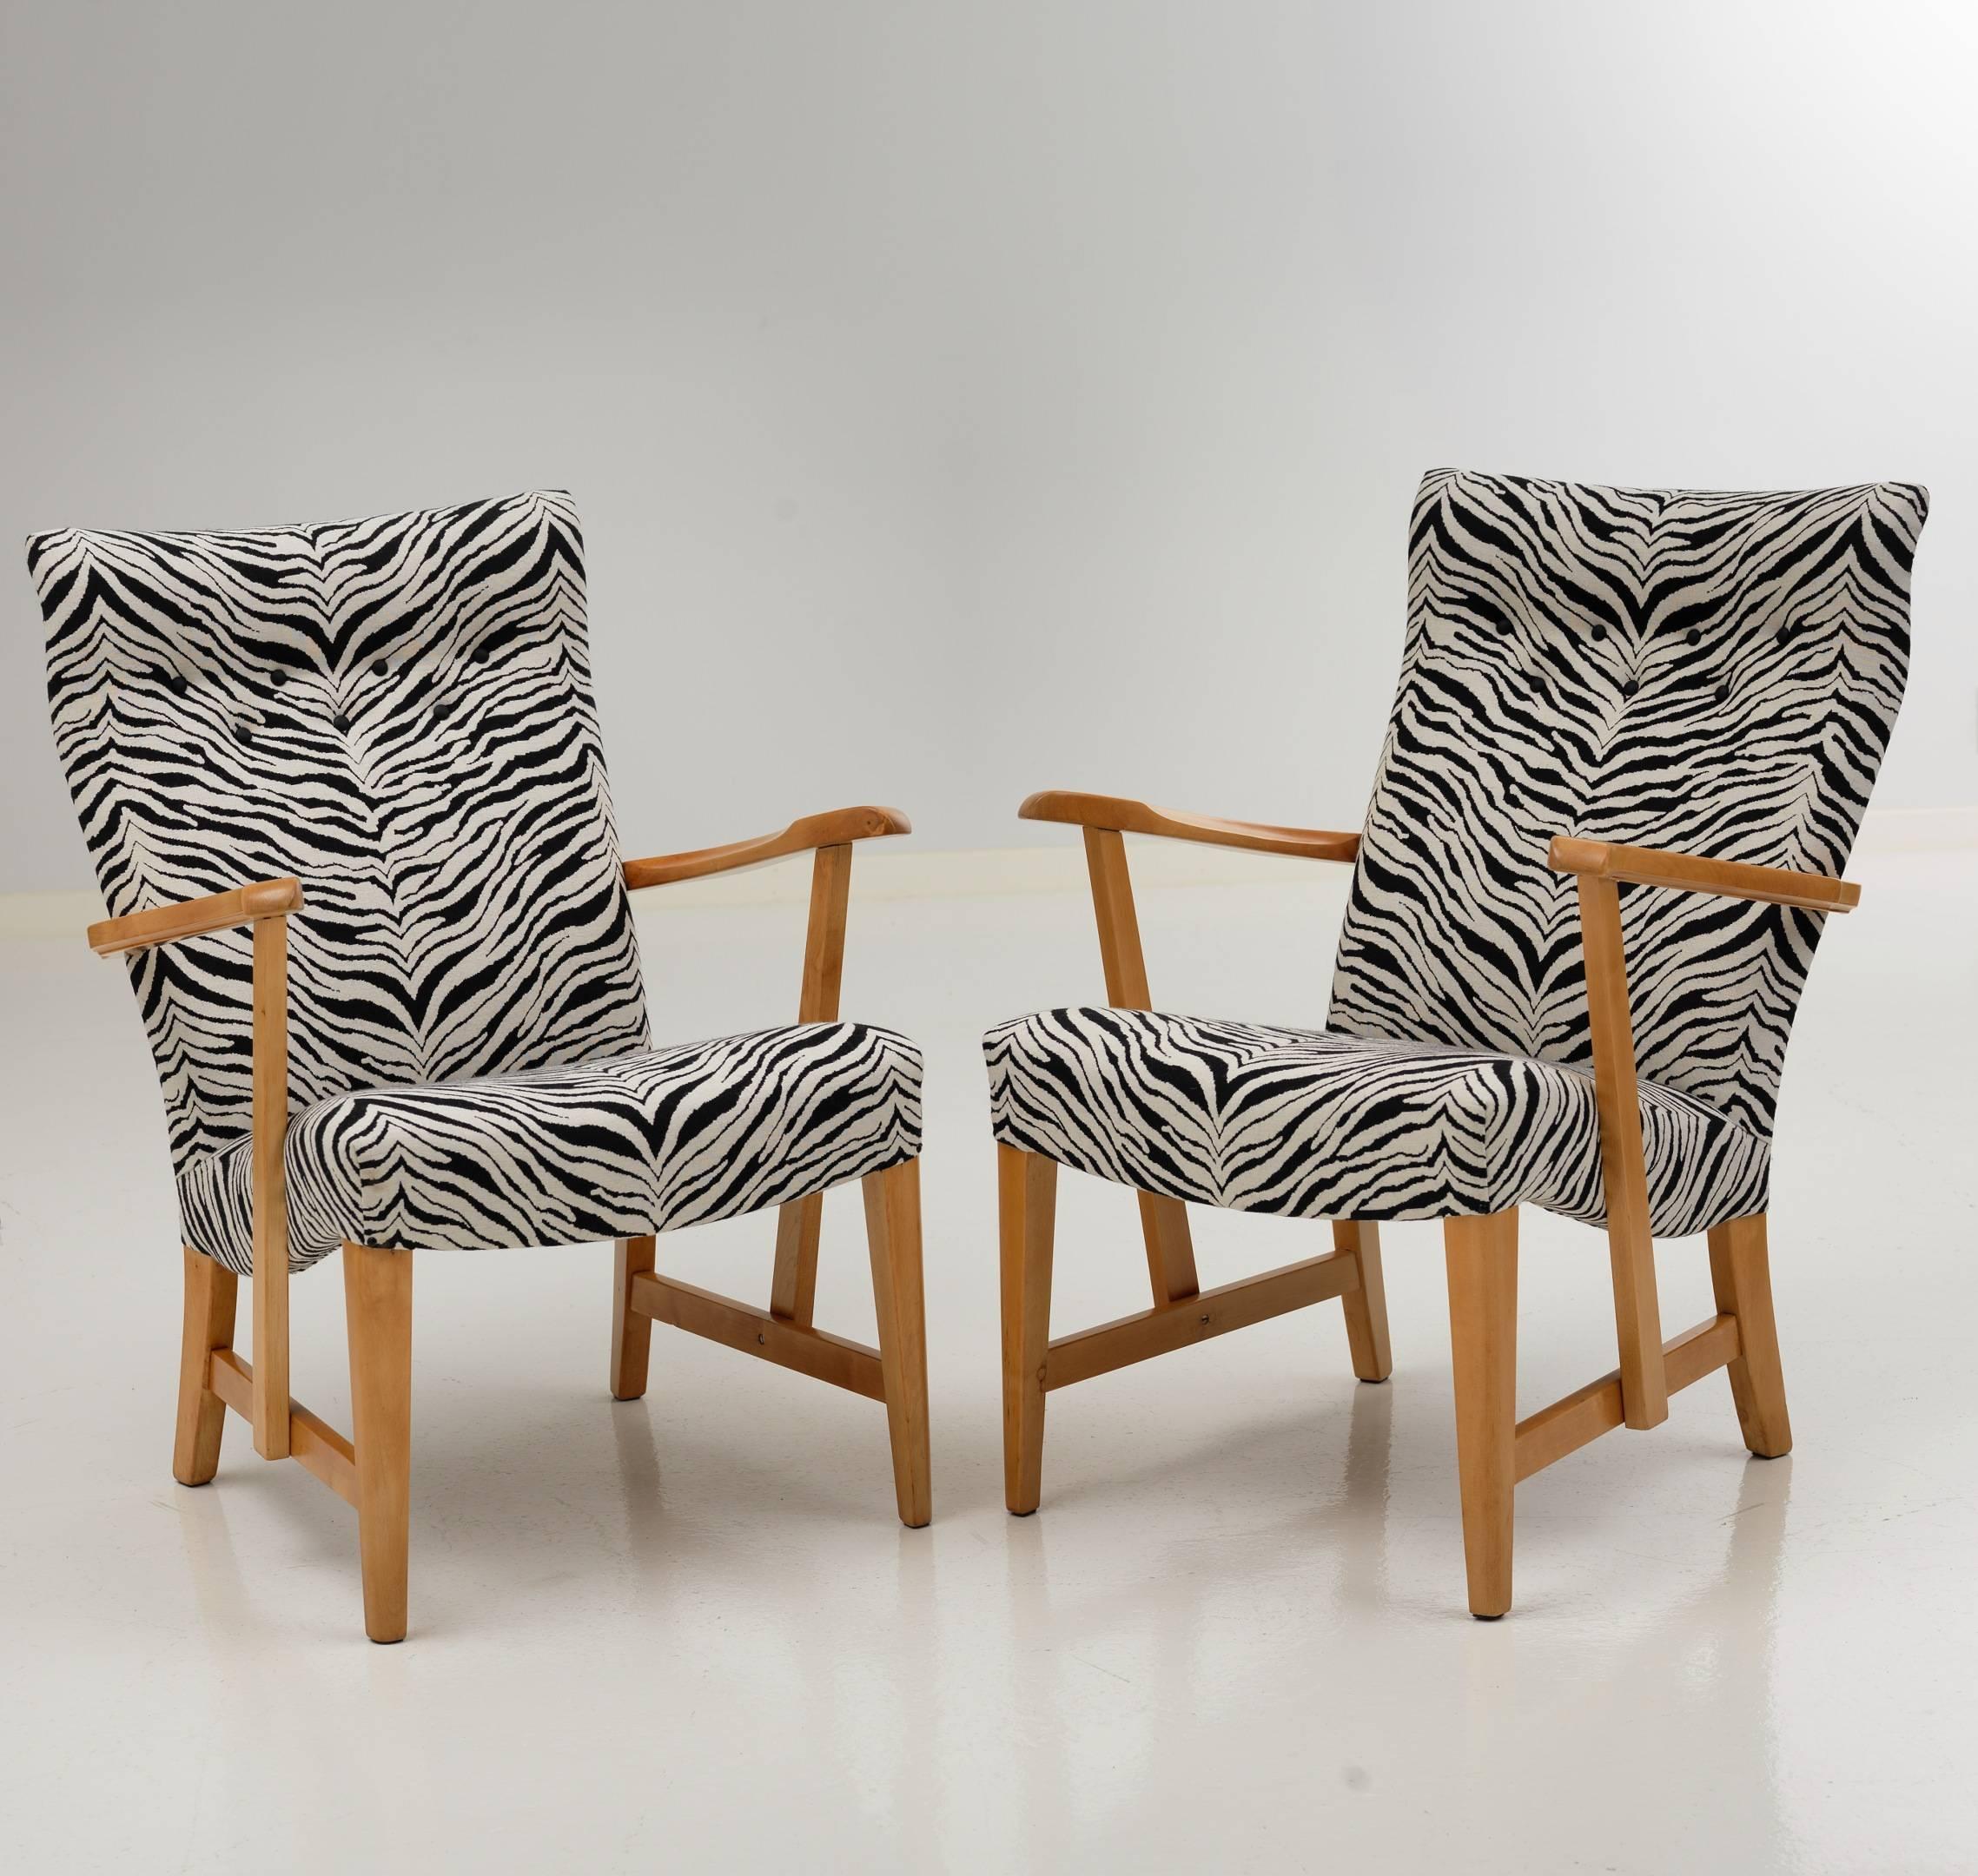 Pair of restored Prinssi easy chairs by Carl-Gustaf Hiort af Ornäs from 1945. Upholstered with high quality wool fabric with zebra pattern. Wooden parts restored. Measures: width 62.5cm, depth 70cm, height 86cm, seat height 43cm. Labelled.